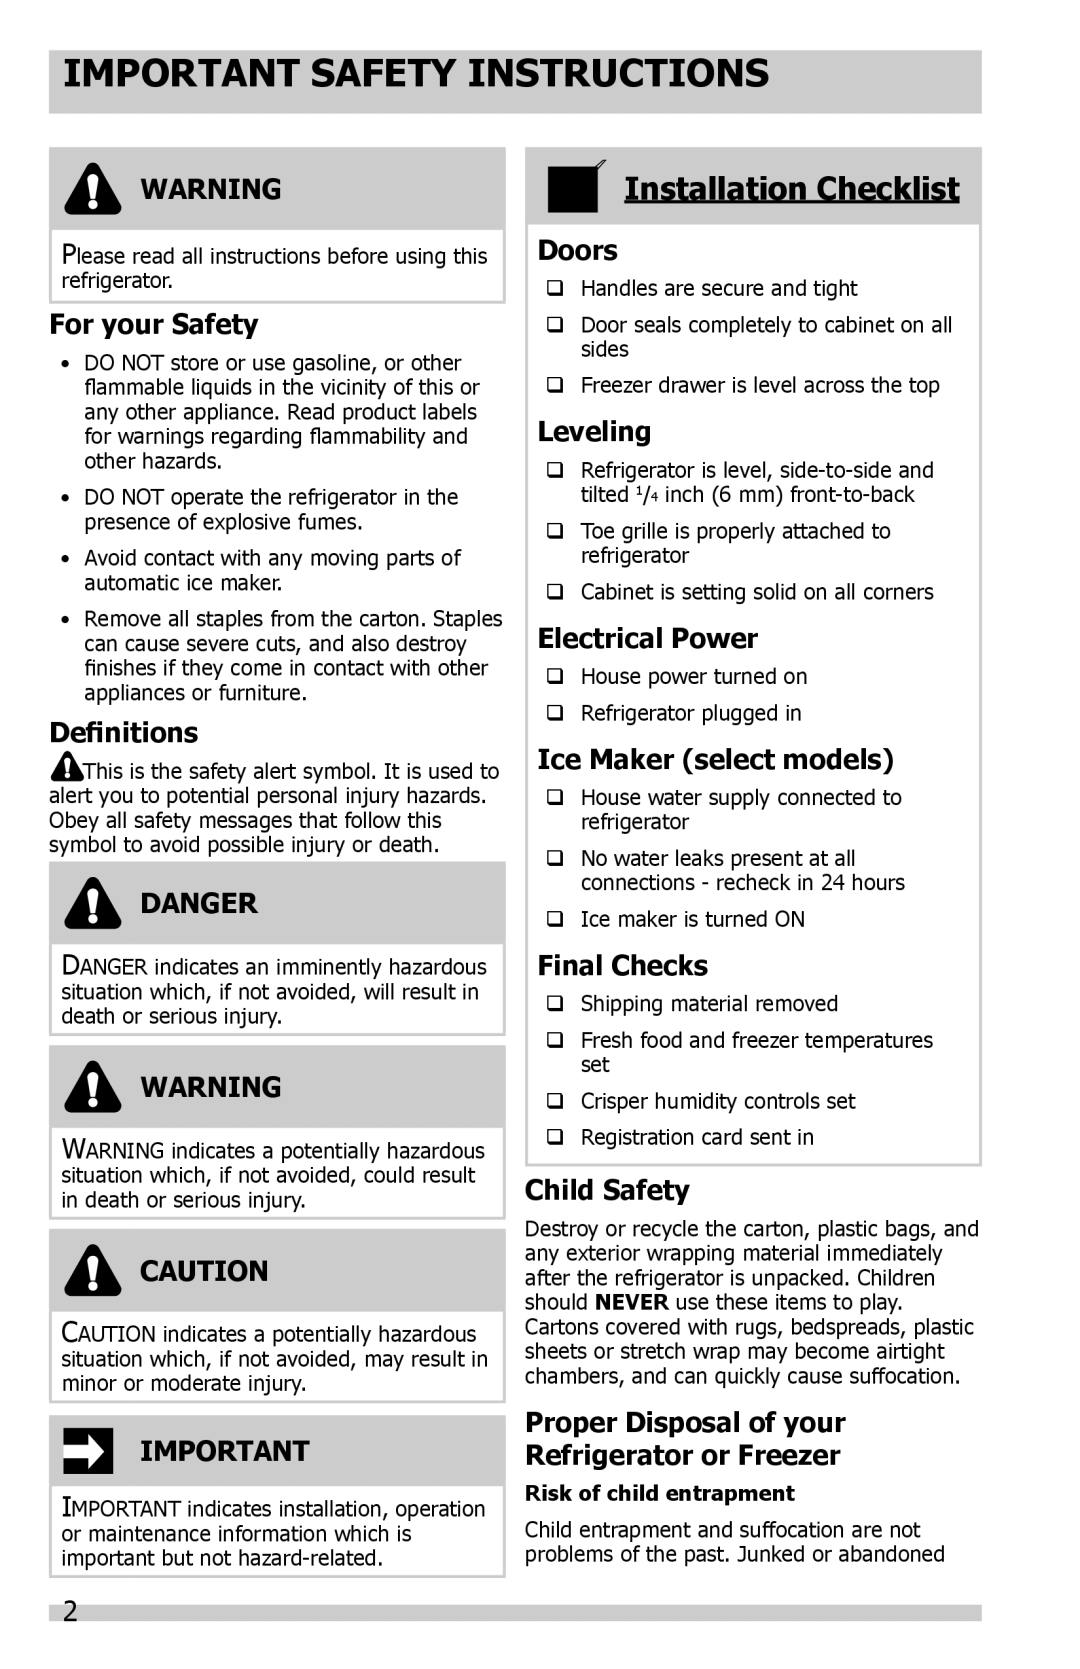 Frigidaire FGUN2642LP Important Safety Instructions, For your Safety, Definitions, Danger, Doors, Leveling, Final Checks 